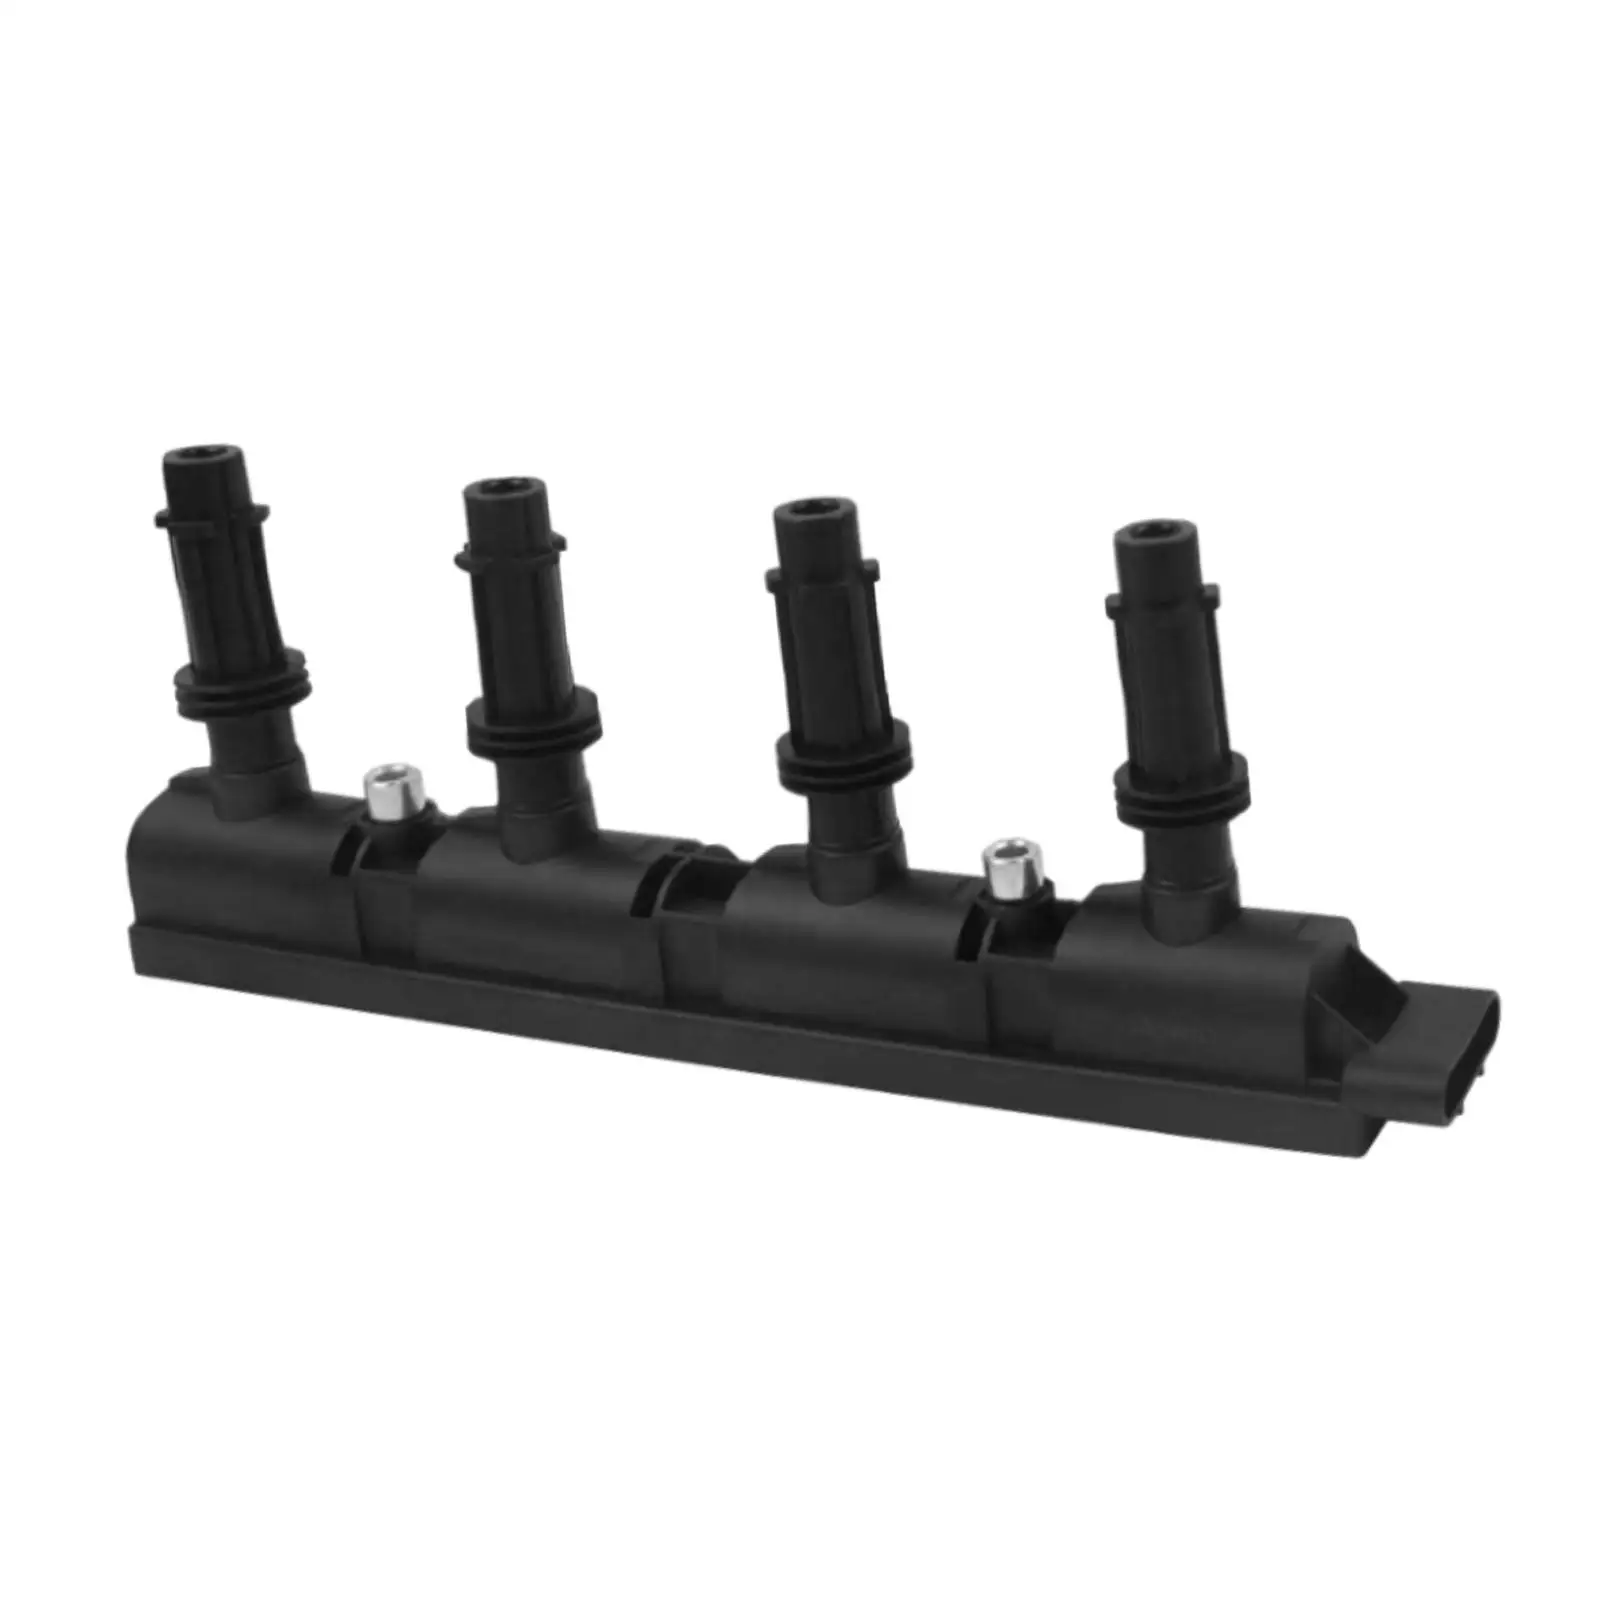 Replacement Ignition Coil 55573735 25198623 for Chevy Sonic Good Performance Easily Install Durable Automotive Accessories